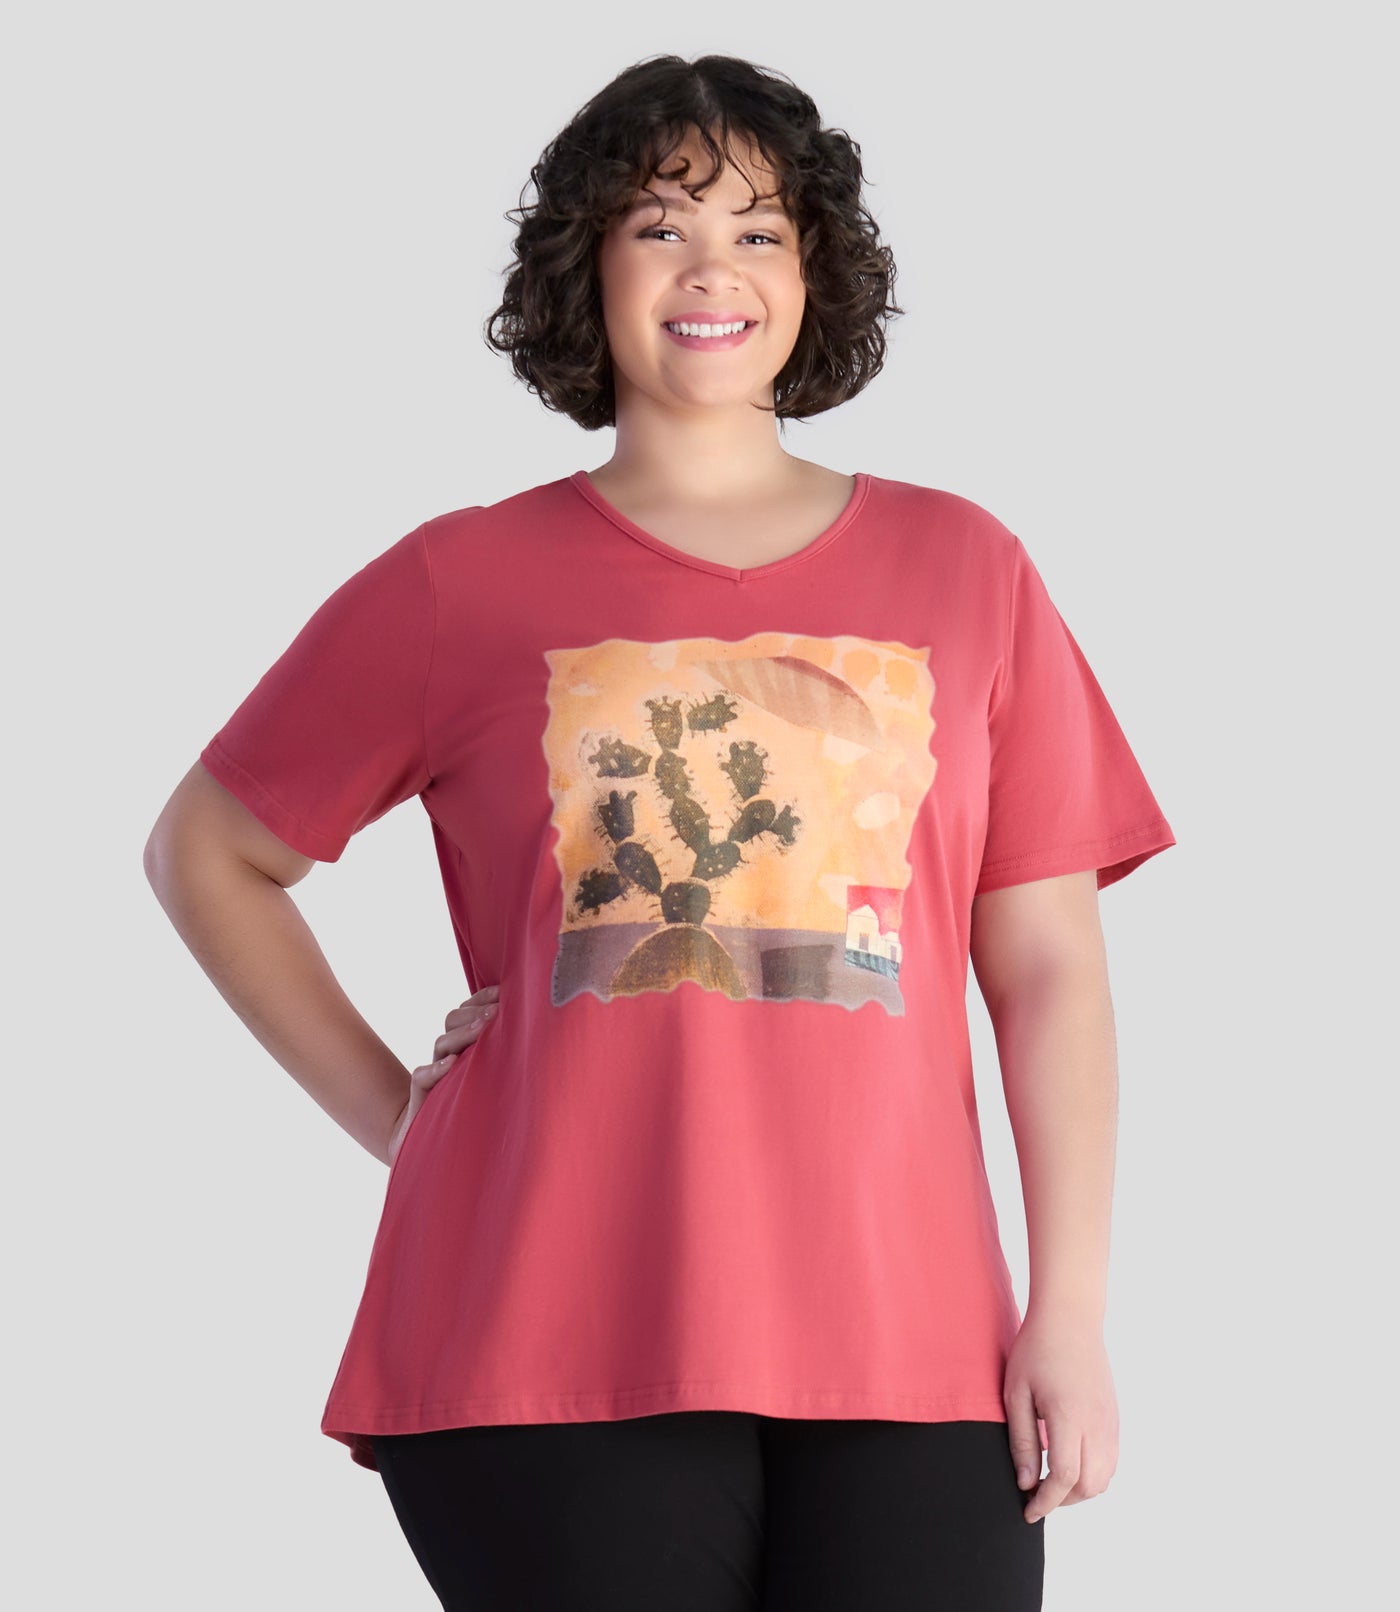 Model is wearing JunoActive's designer graphic v-neck top in rosy red. Printed is a Sedona scene with cactus, a house in the background and lovely warm colors with unique texture. Models right hand is on her hip and left arm is by her side. 